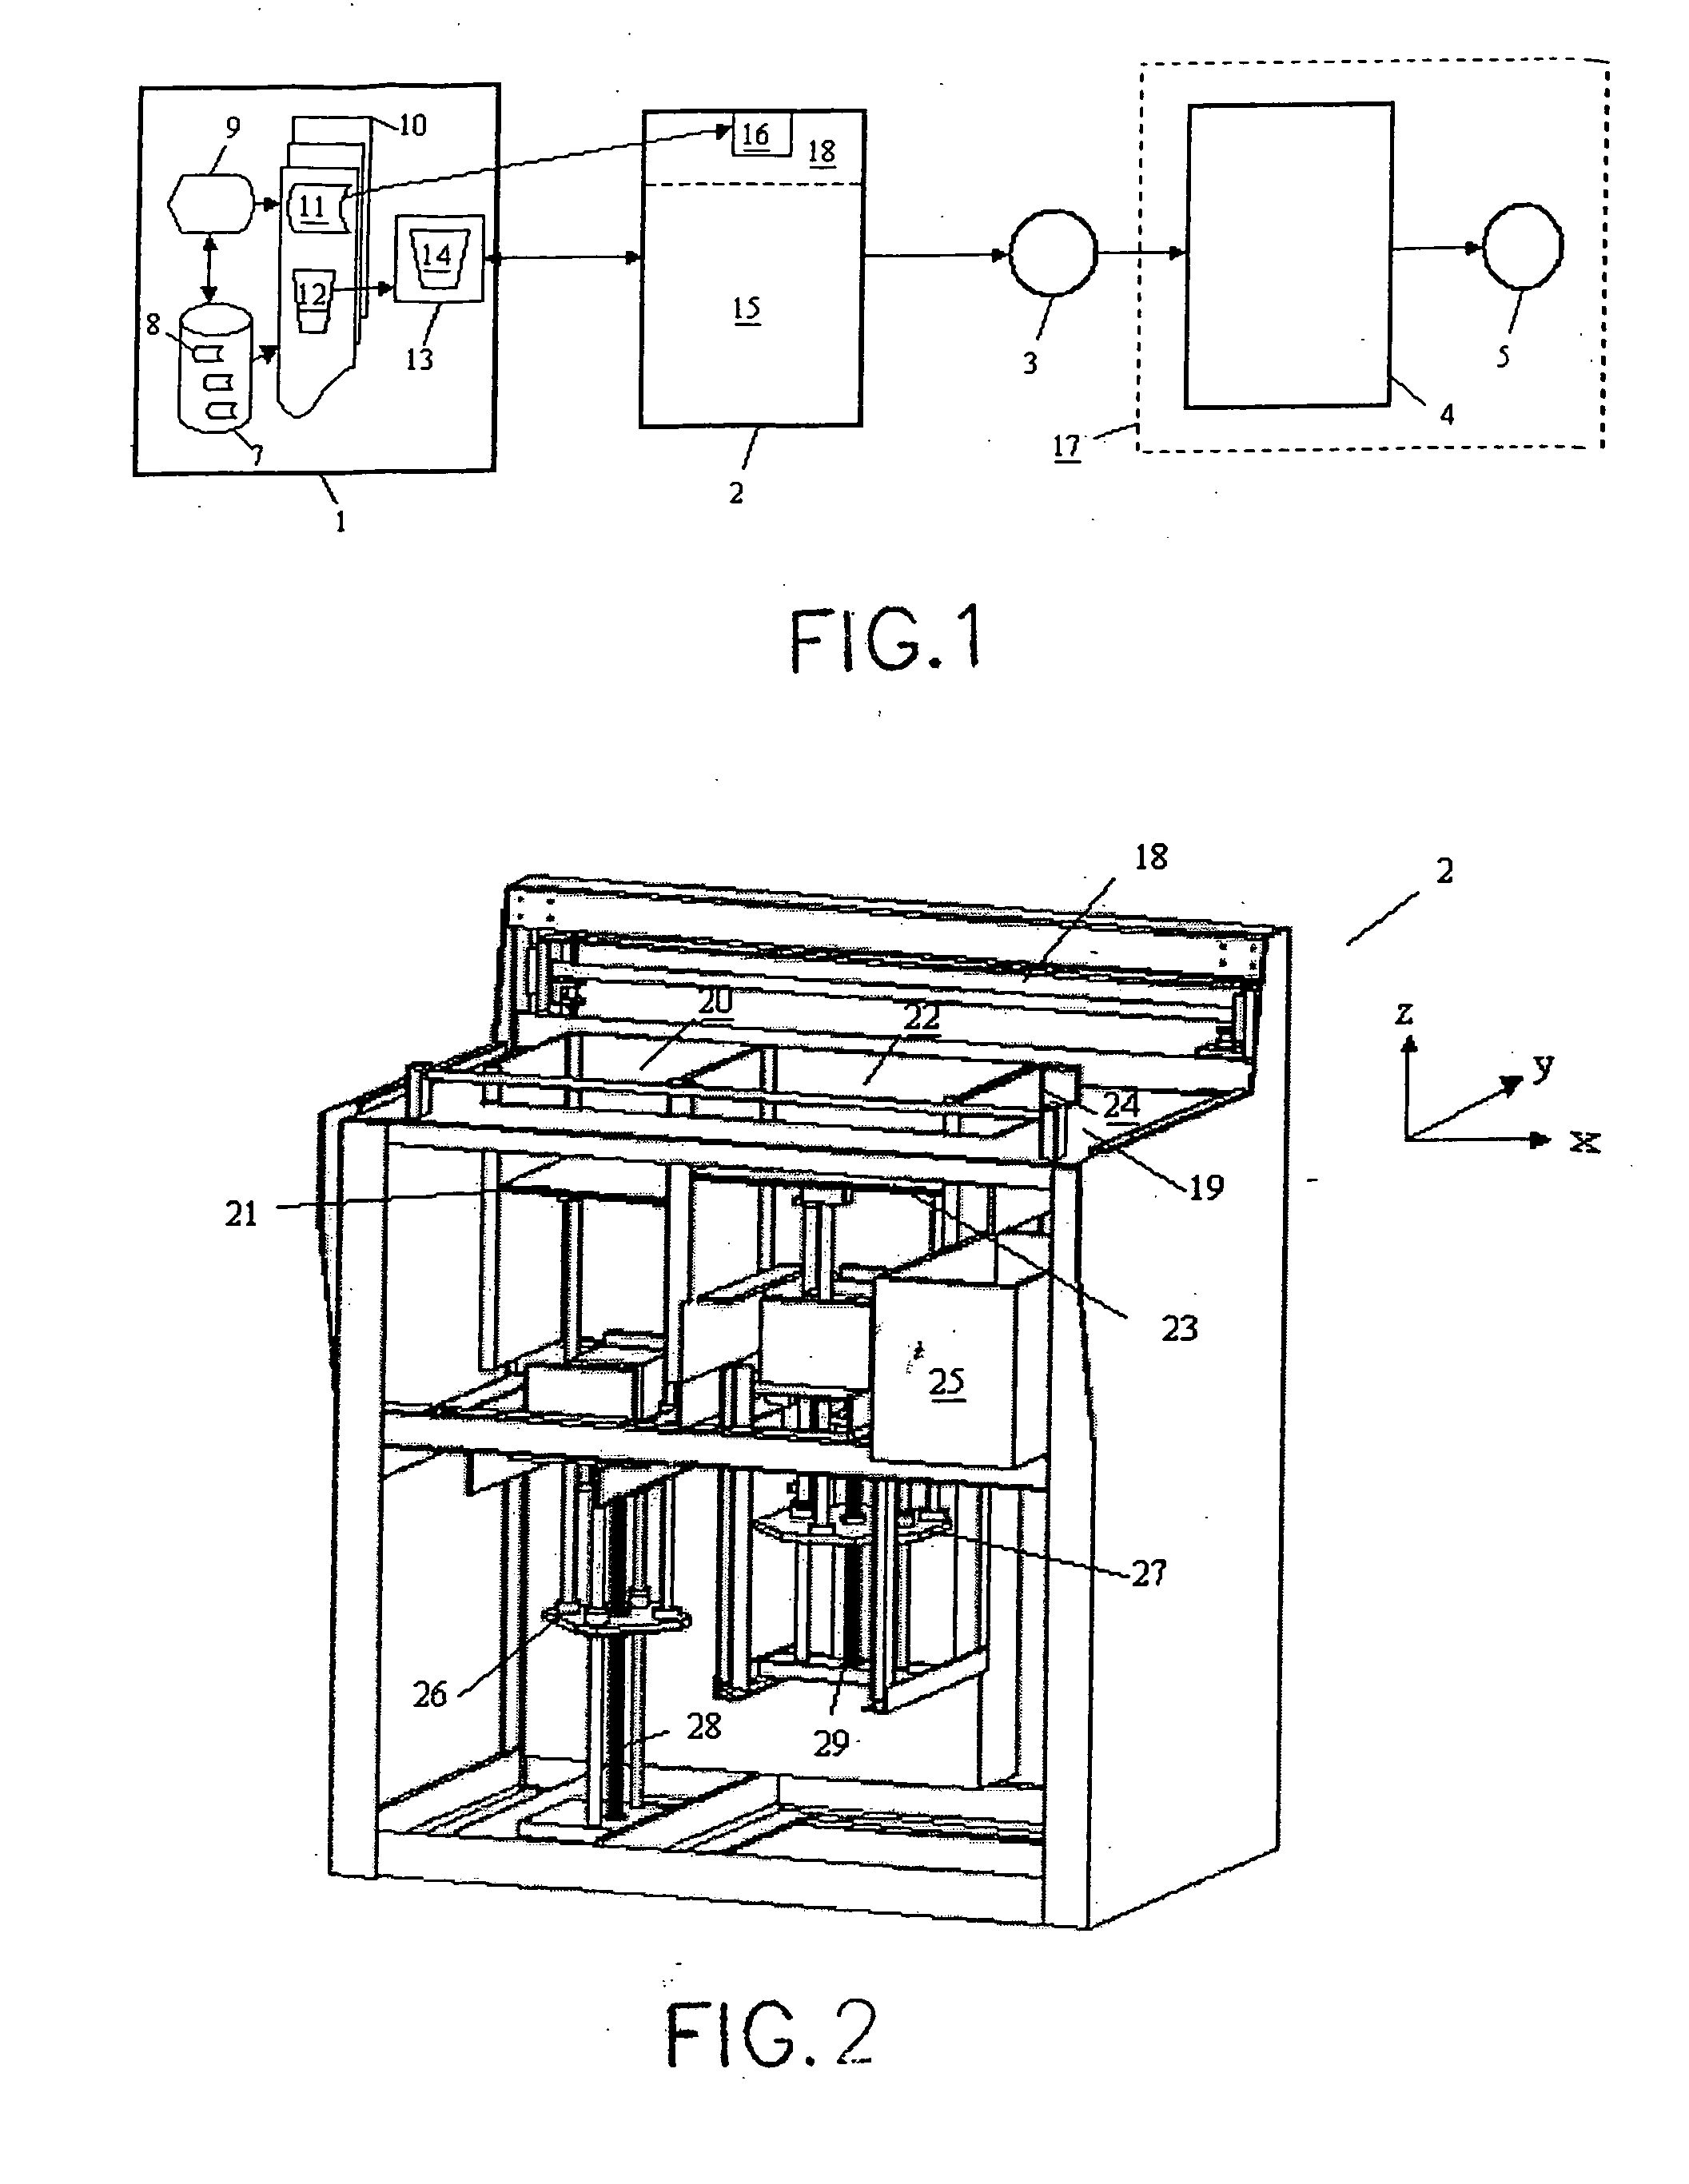 Method and apparatus for rapid prototyping using computer-printer aided to object realization